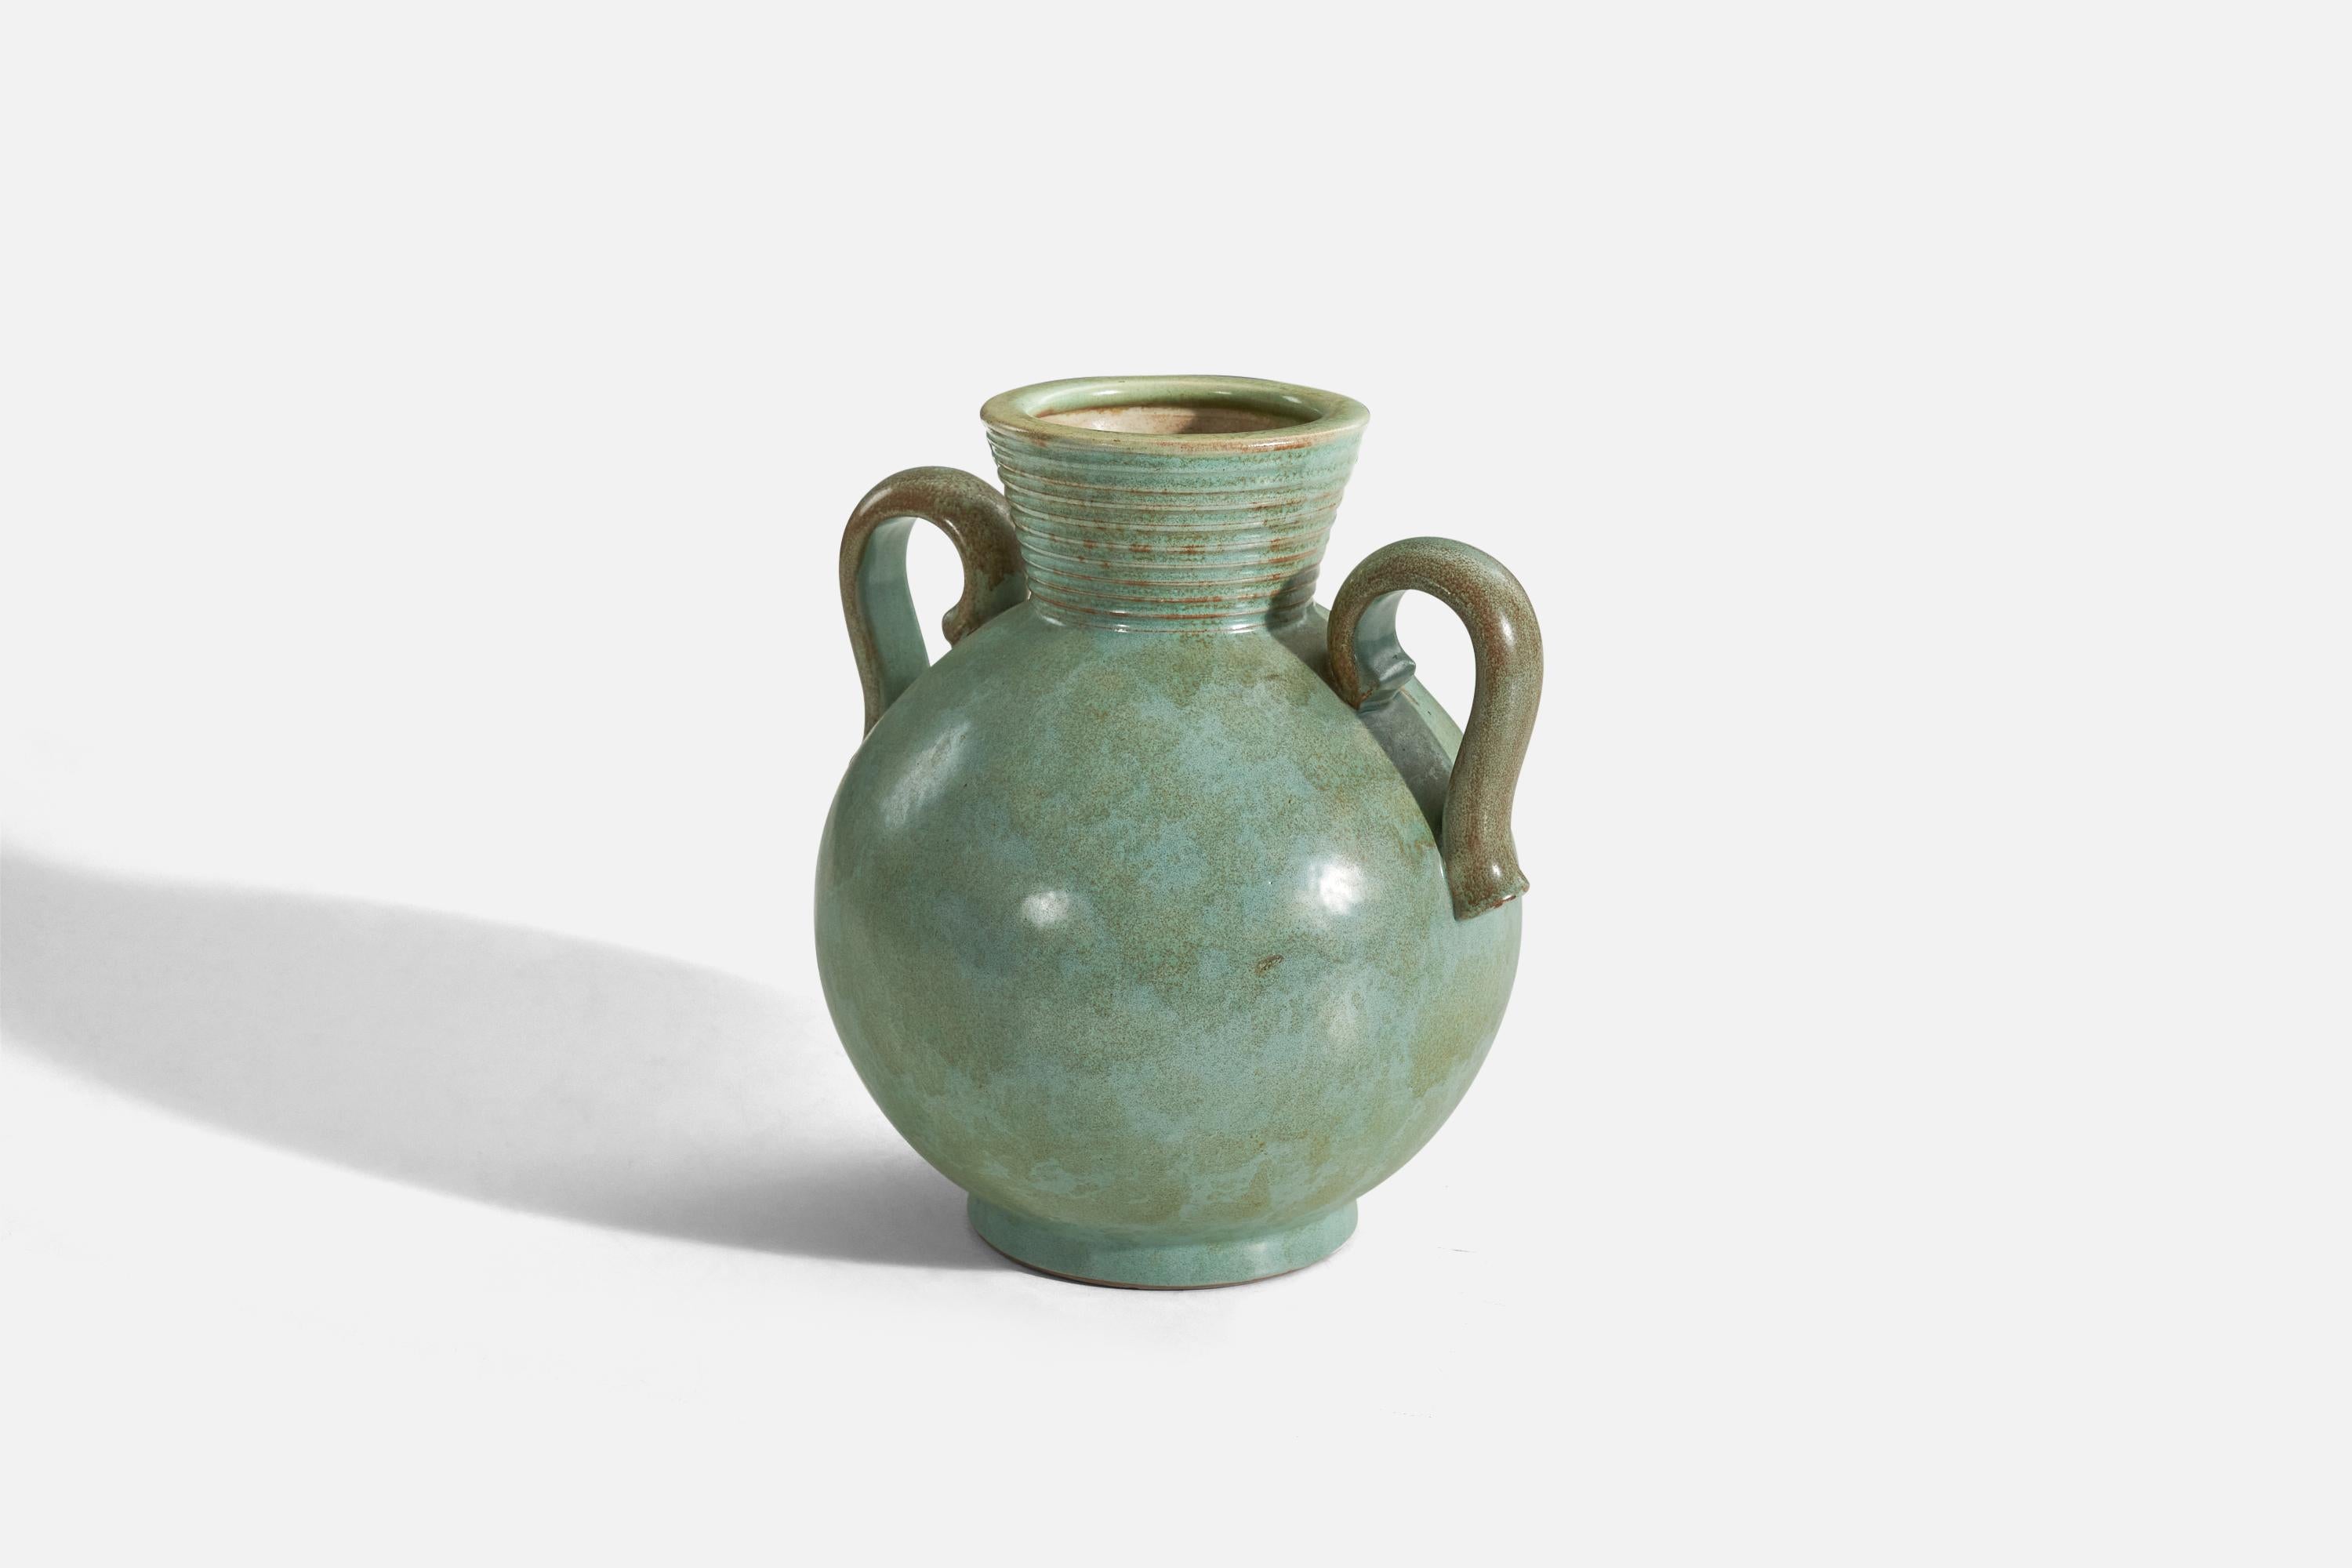 A green, glazed stoneware vase designed by Christer Heijl and produced by his studio Christers Keramik, Sweden, c. 1950s.